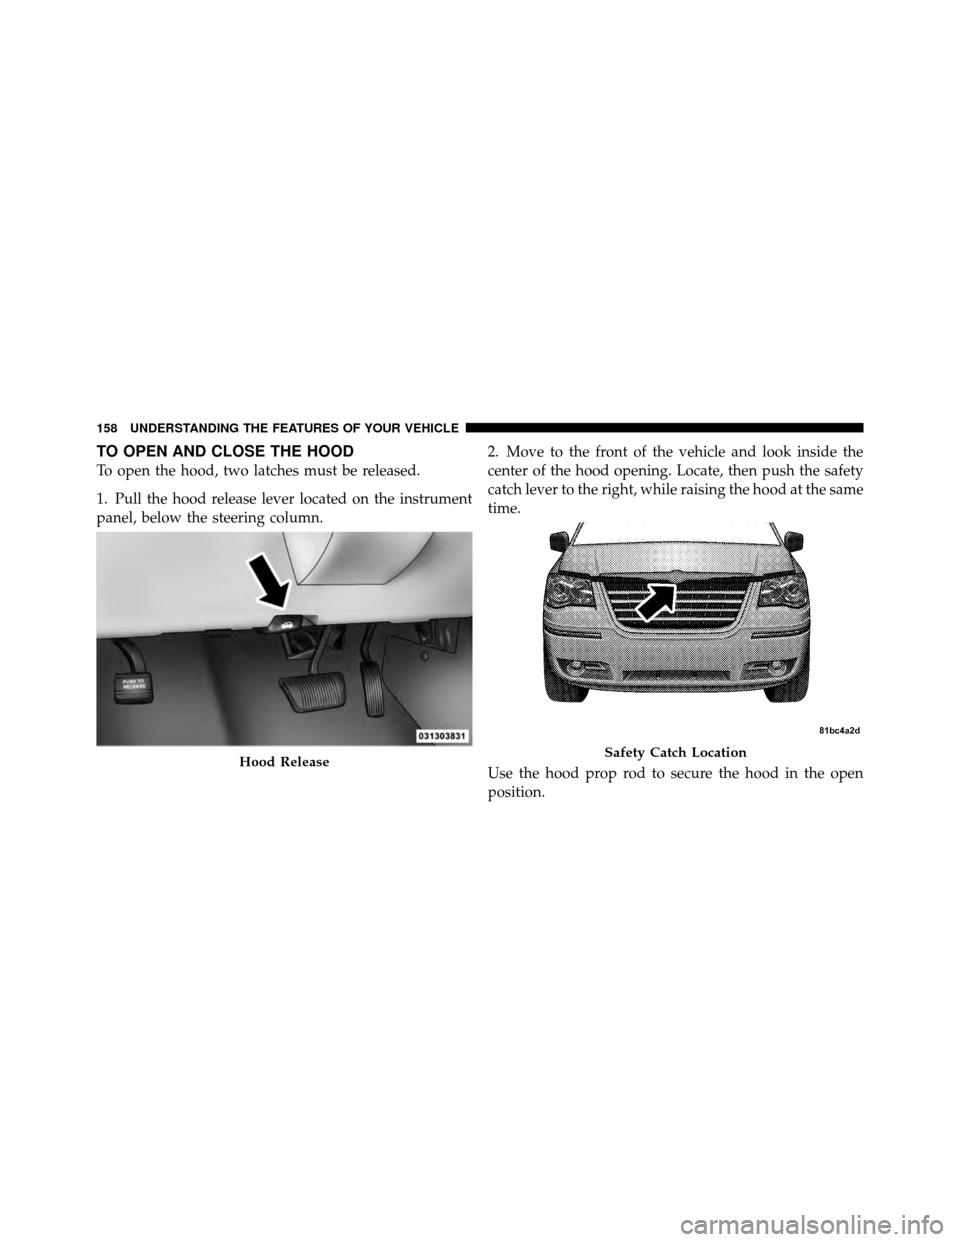 CHRYSLER TOWN AND COUNTRY 2010 5.G Owners Manual TO OPEN AND CLOSE THE HOOD
To open the hood, two latches must be released.
1. Pull the hood release lever located on the instrument
panel, below the steering column.2. Move to the front of the vehicle